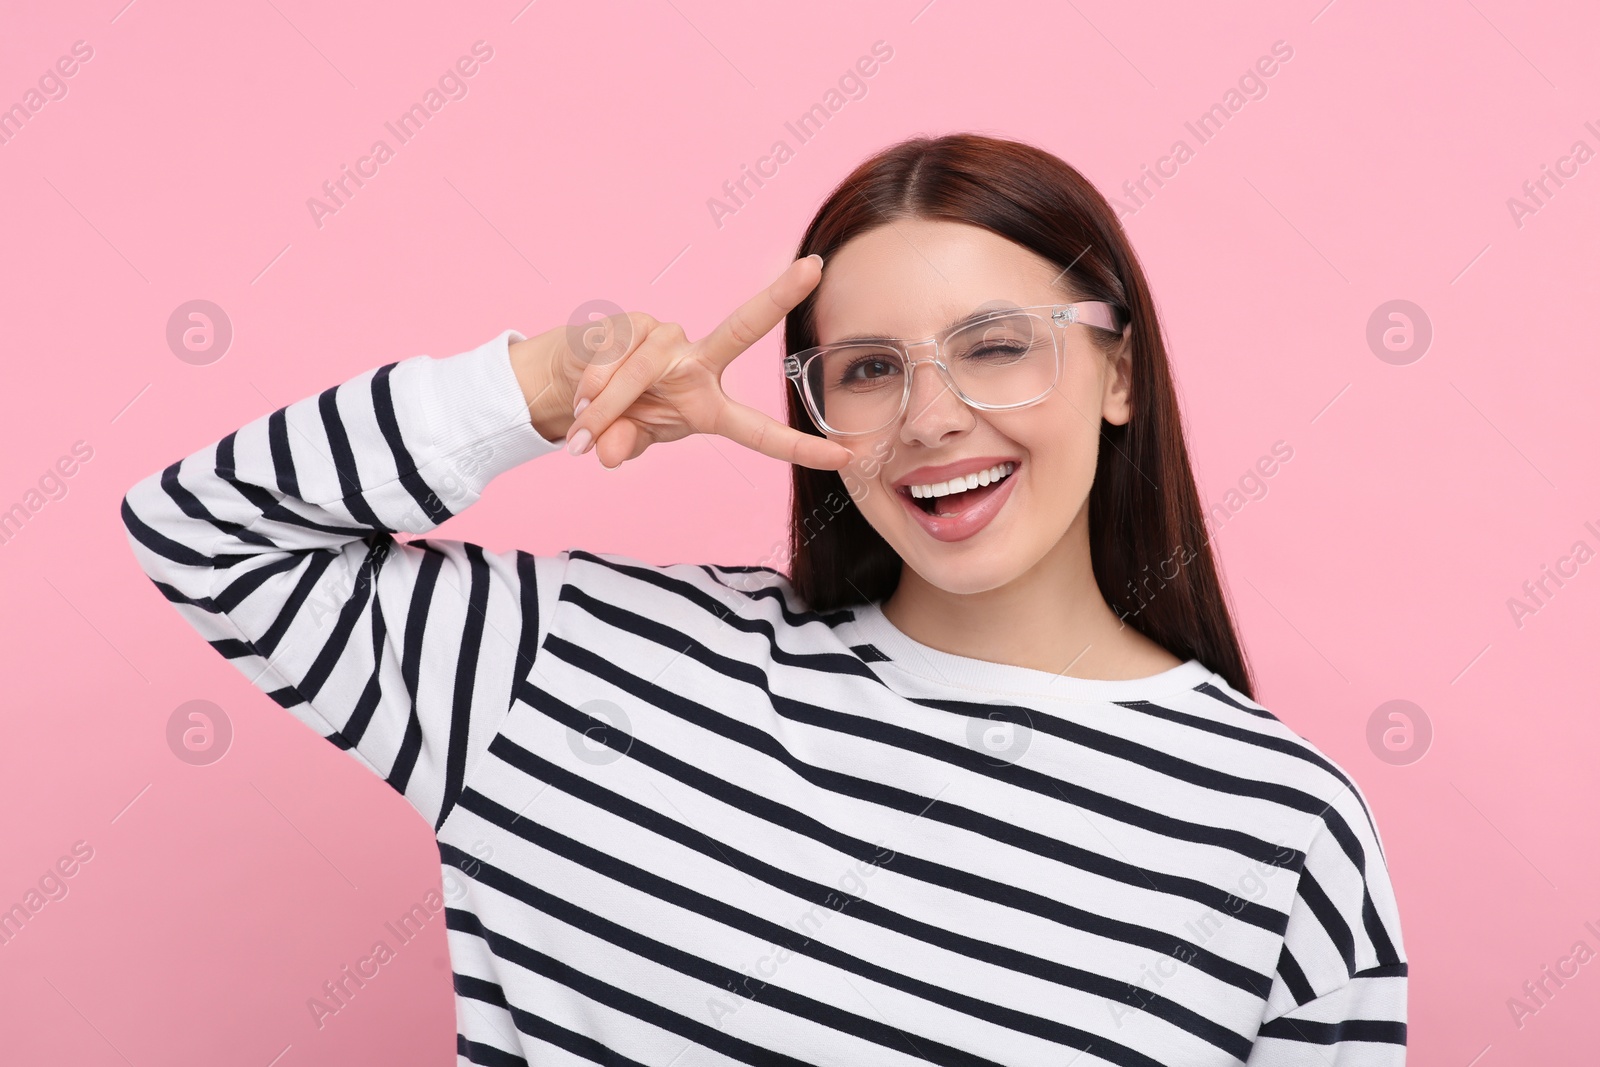 Photo of Portrait of woman in stylish eyeglasses gesturing on pink background